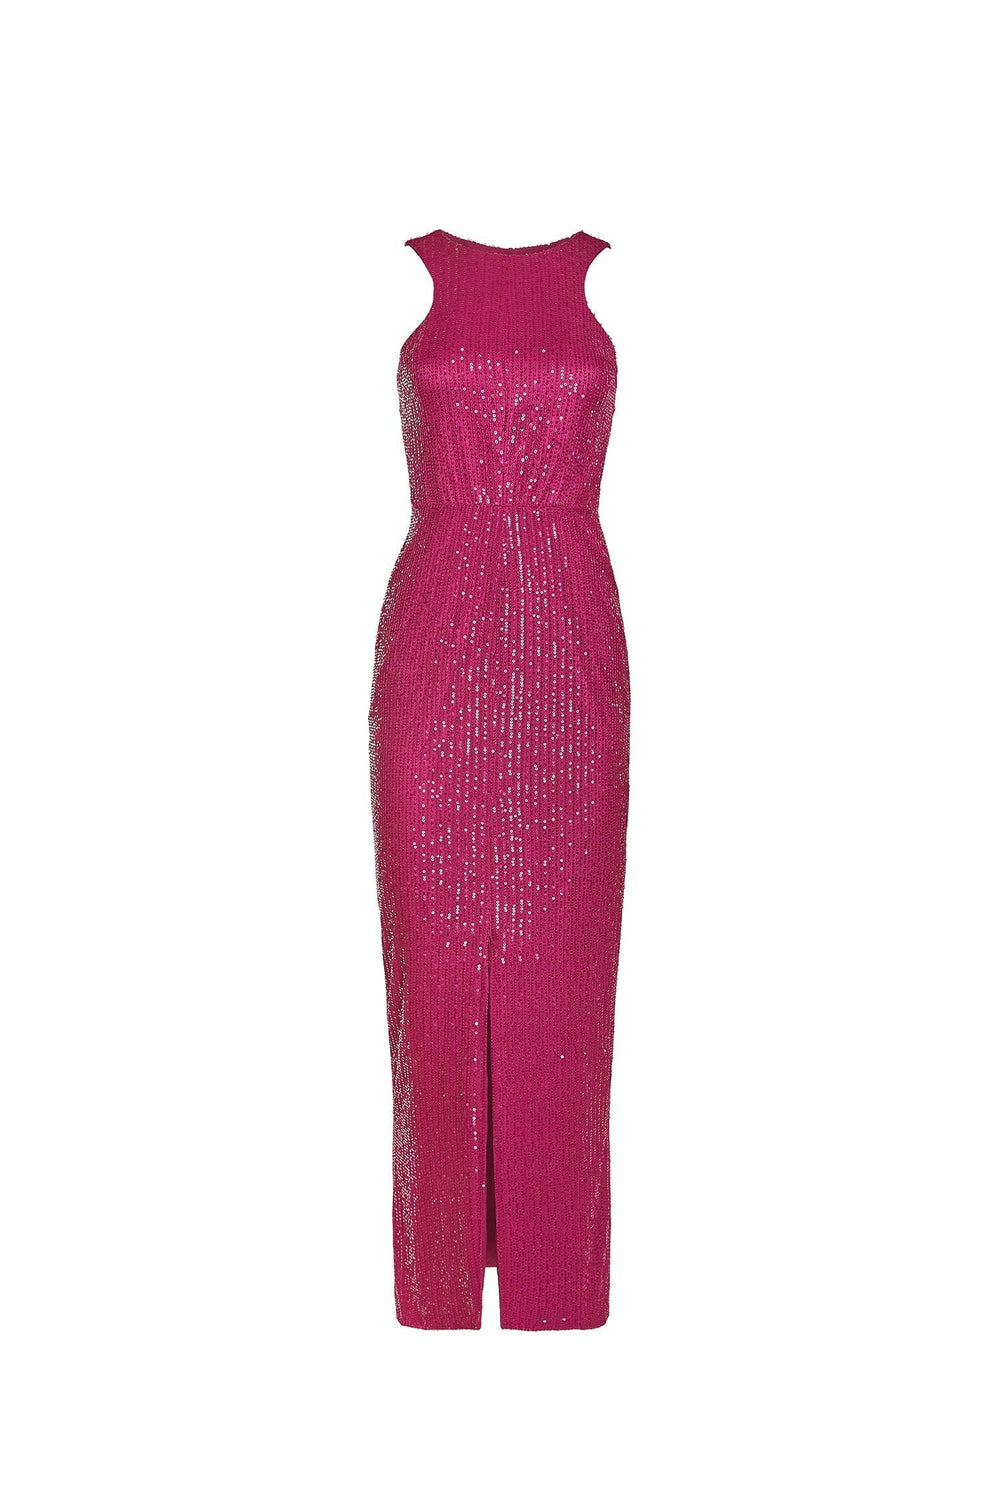 Arielle Magenta Sequin Midi Dress with Racer Neckline and Open Back